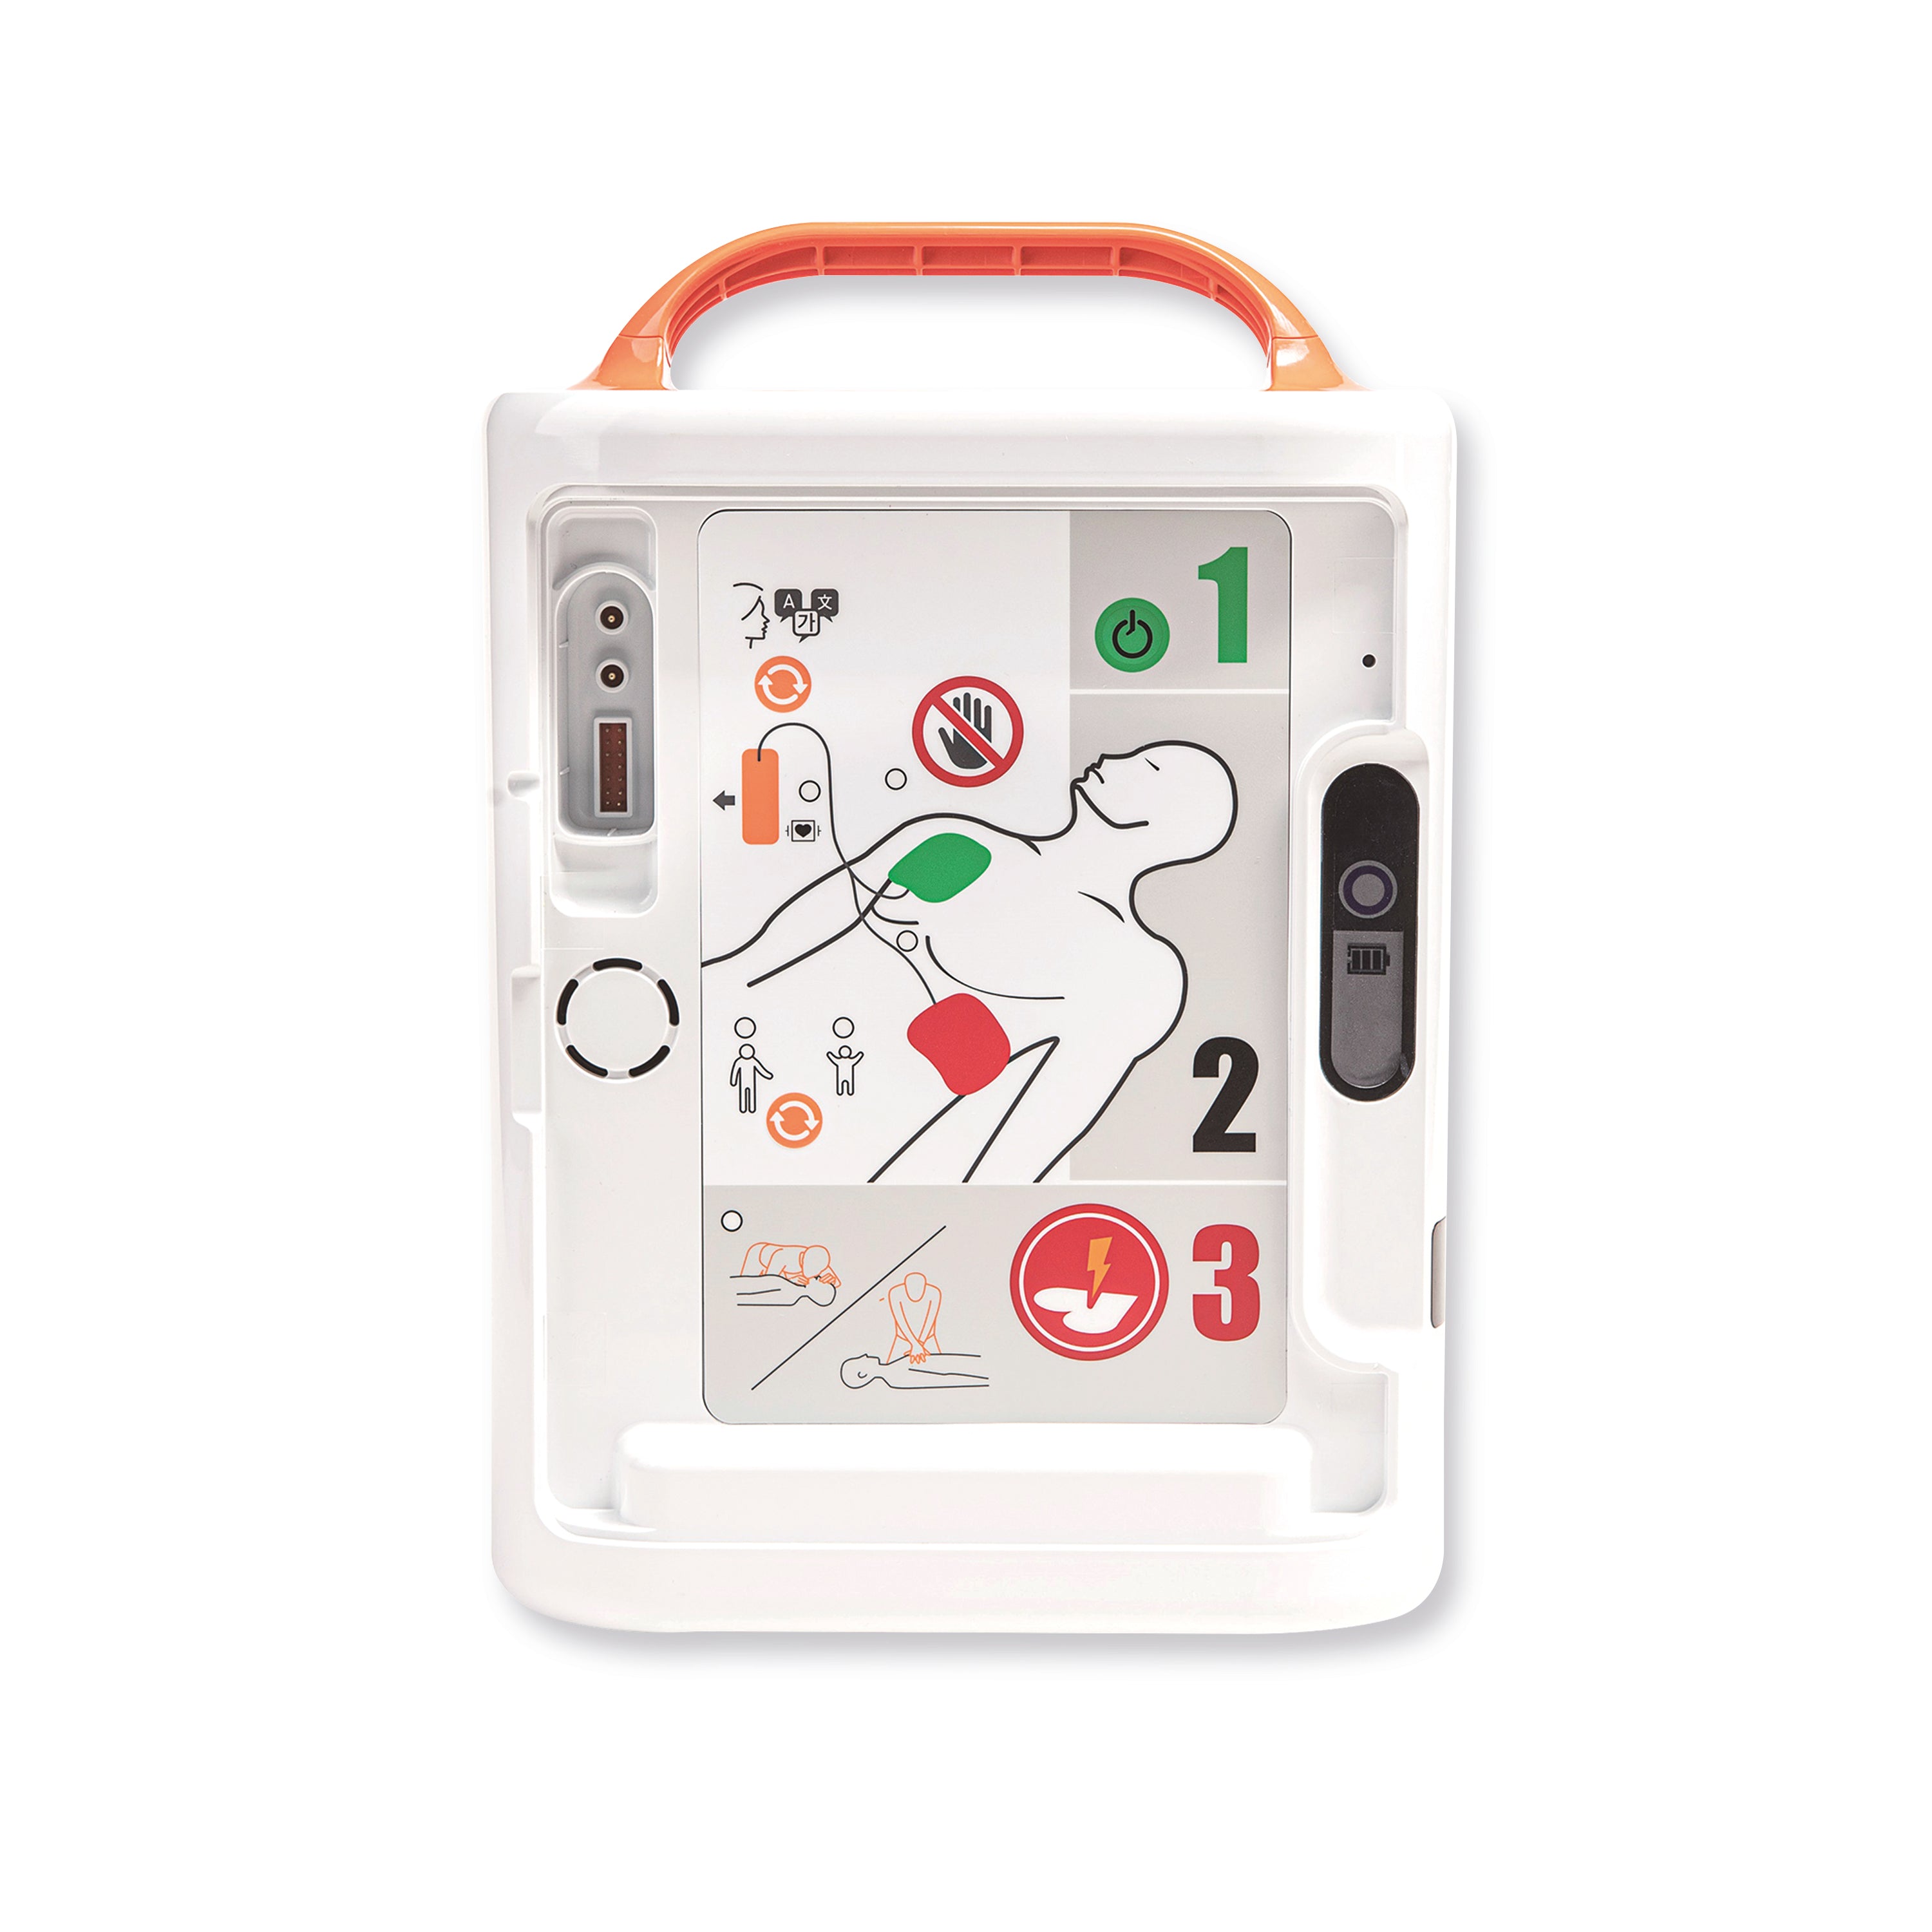 Mediana A16 HeartOn AED (Automated External Defibrillator) Fully-Automatic 2901